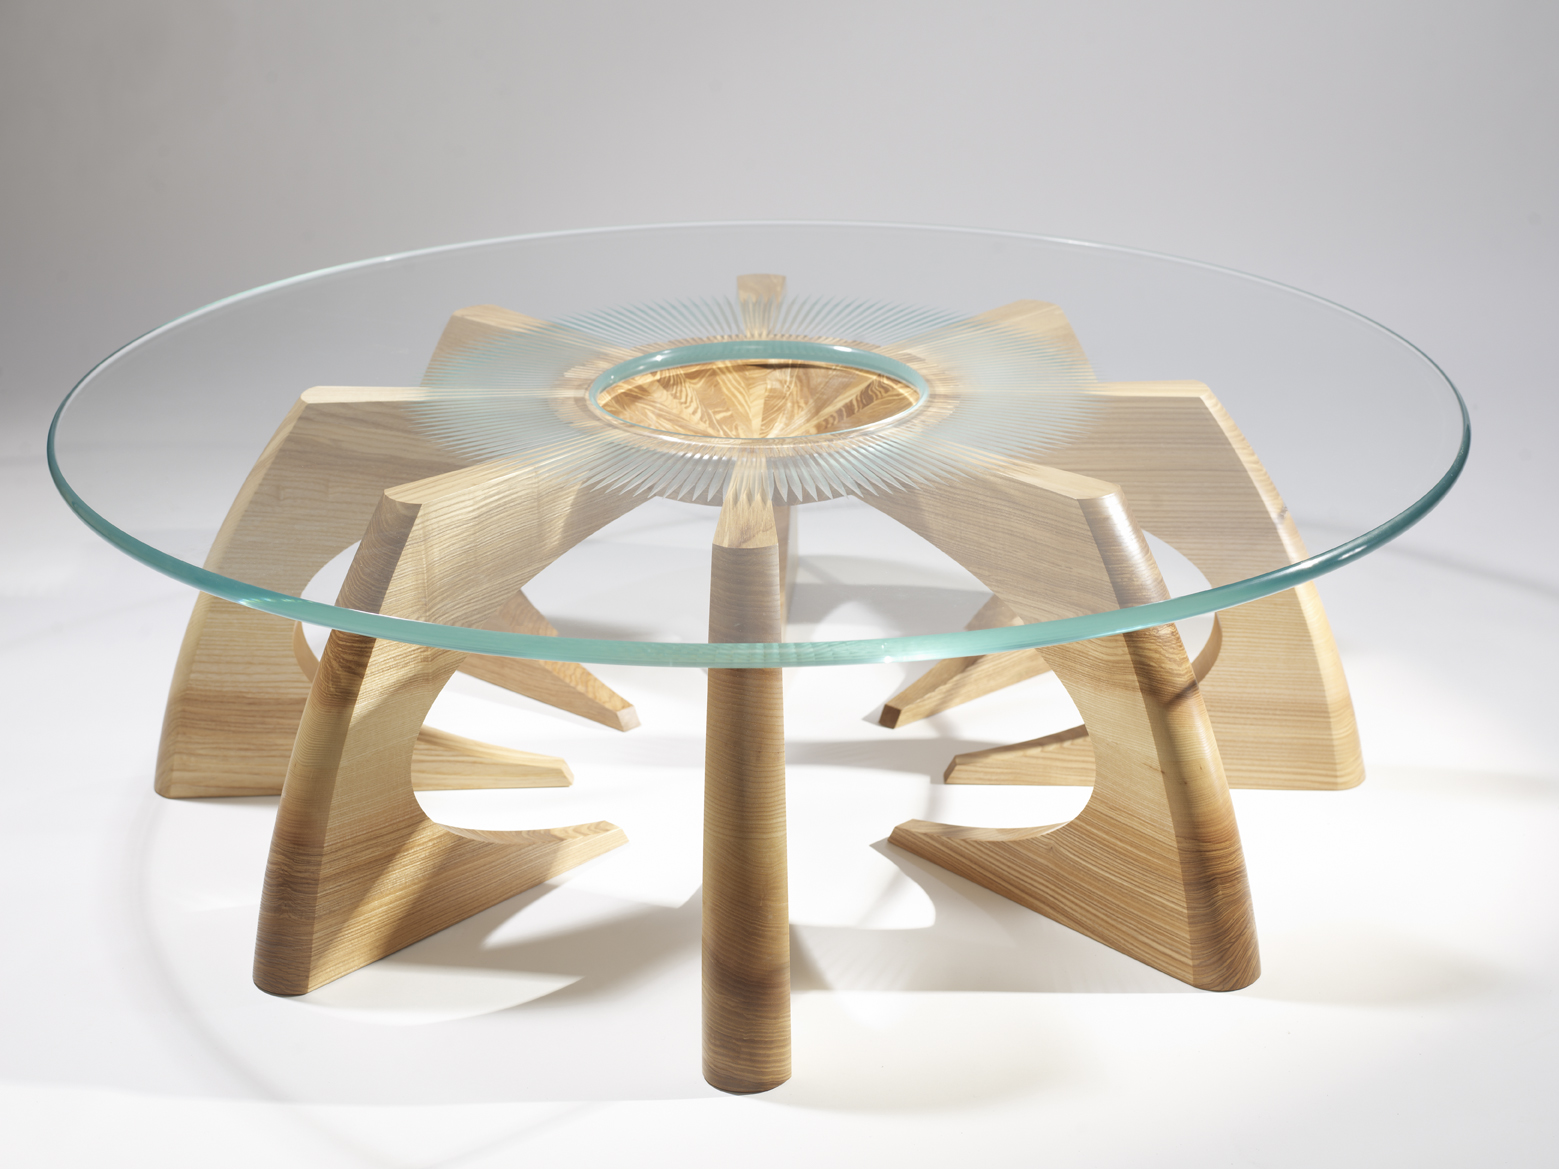 interior house design: a minimalist table but can produce ...